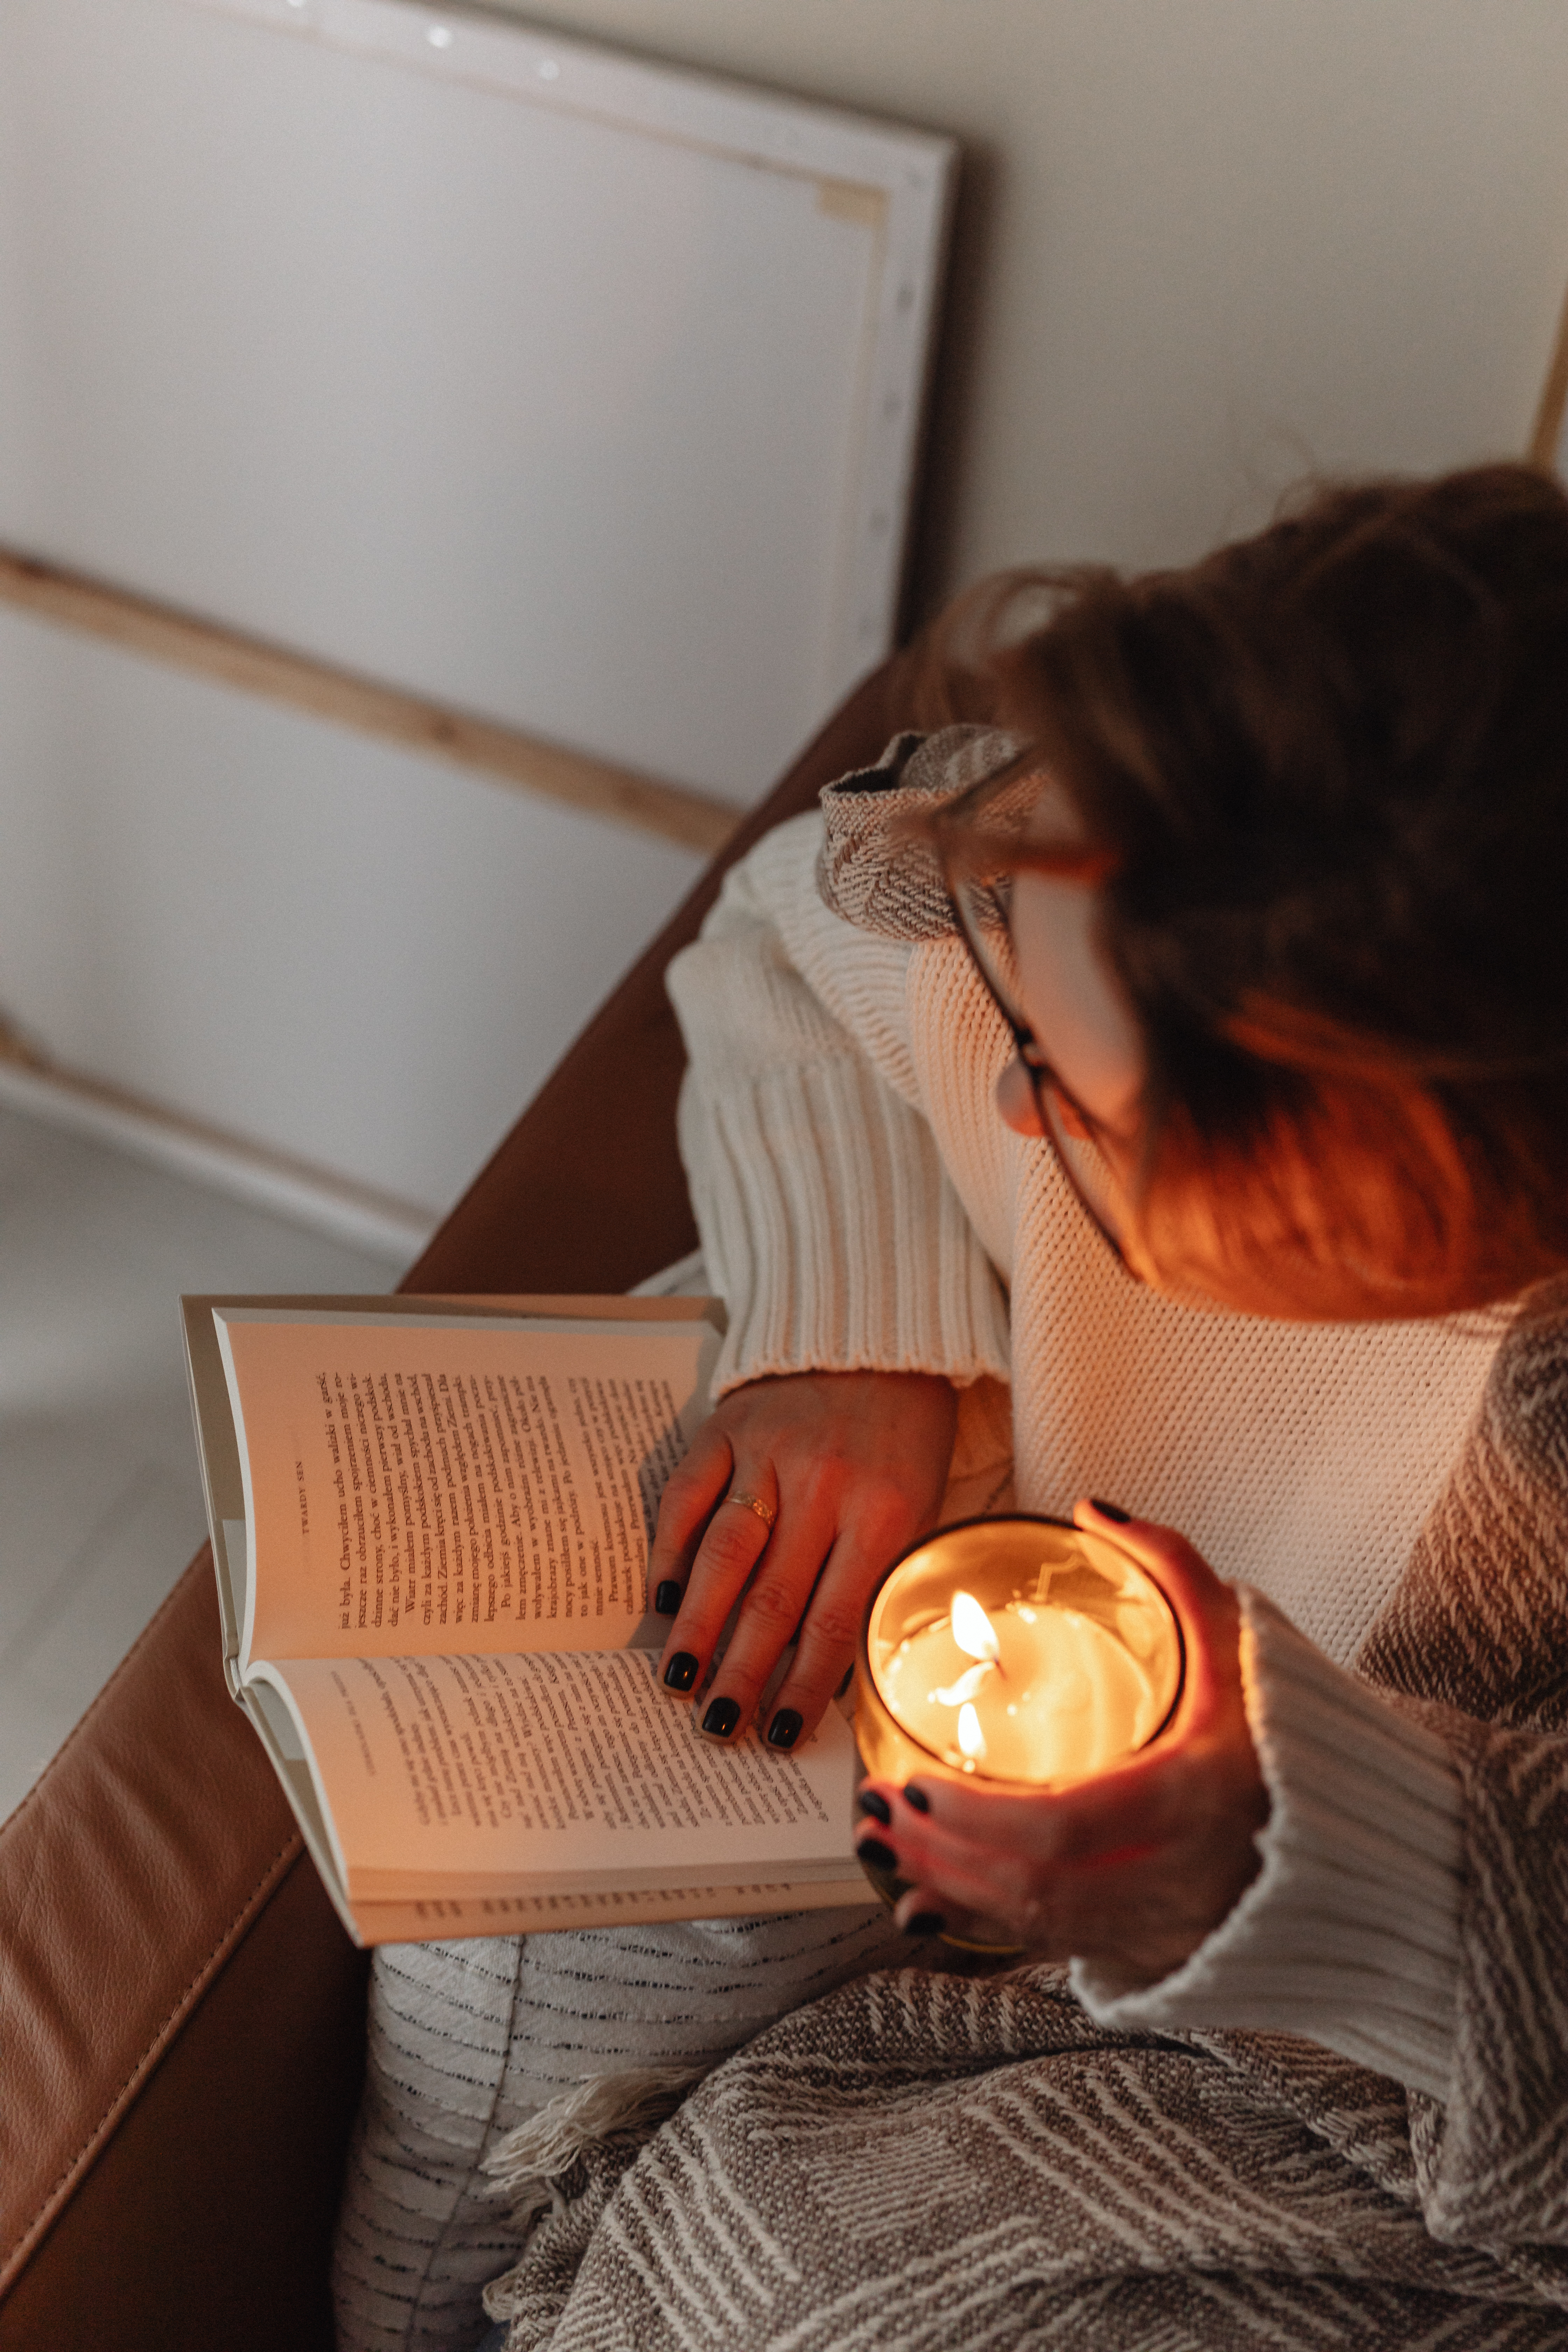 A woman holds a burning candle in her hands - reading a book